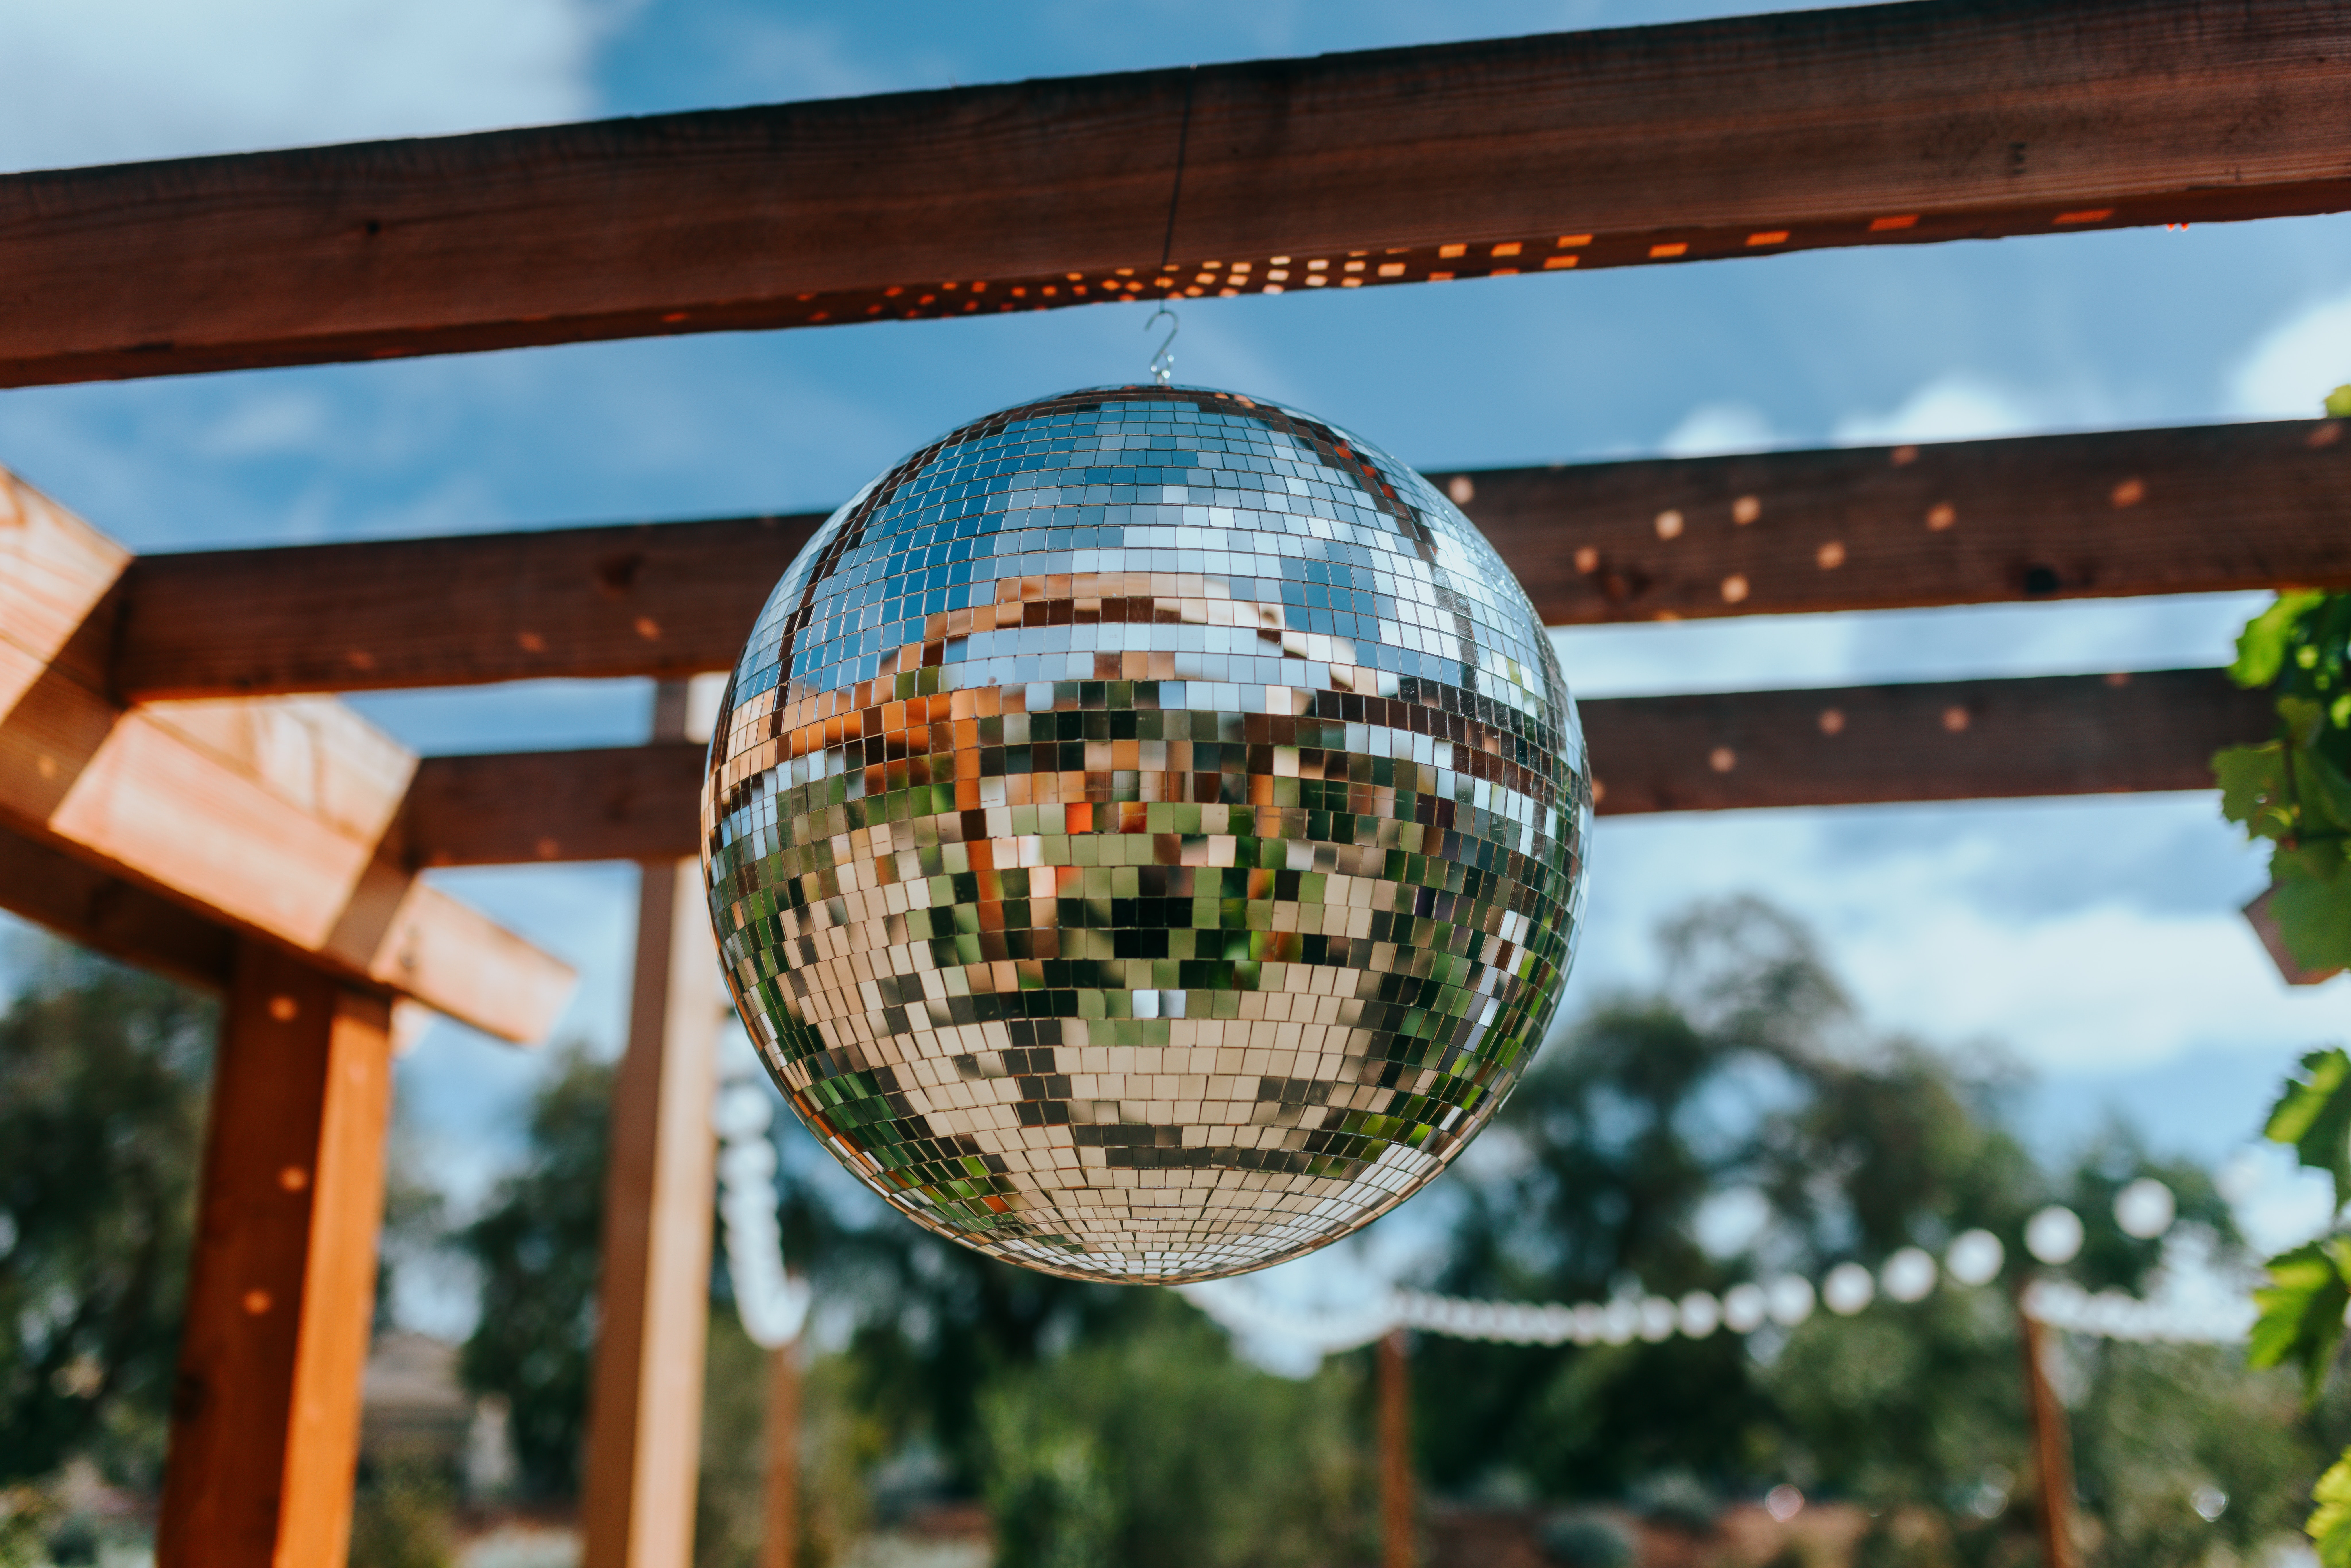 A disco ball hangs outside below a pergola, with a band of lights in the background